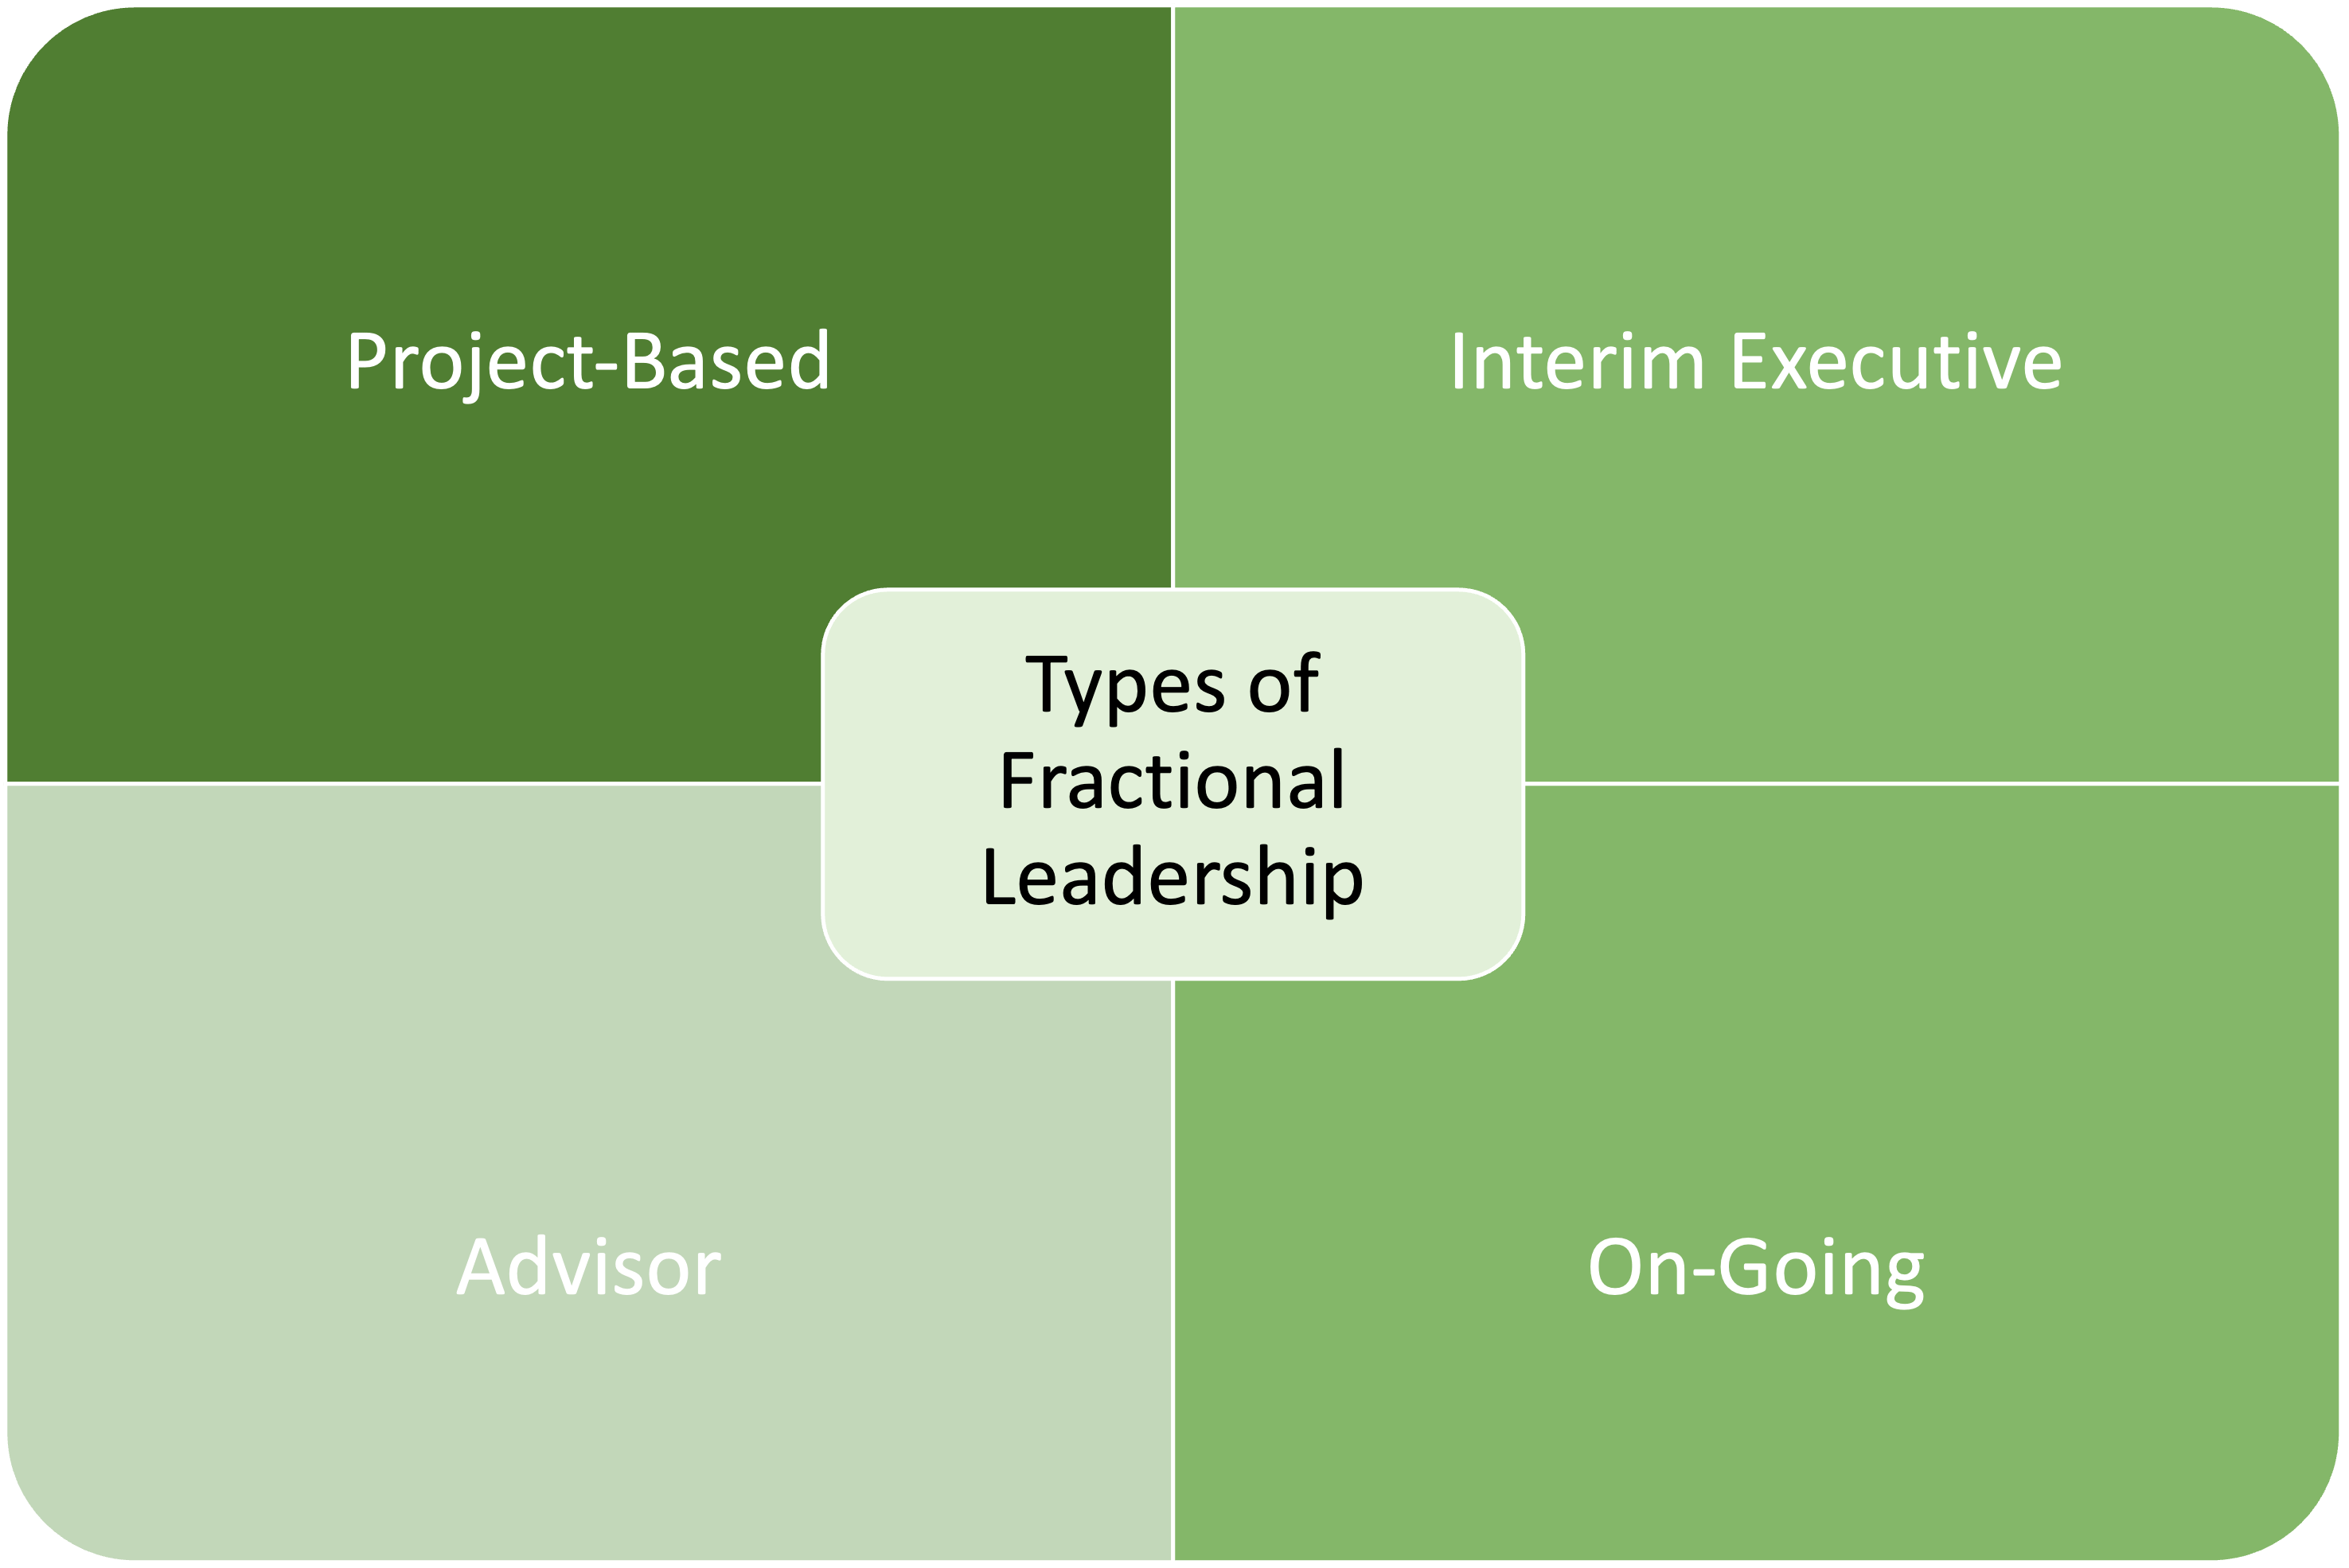 Types of Fractional Leadership